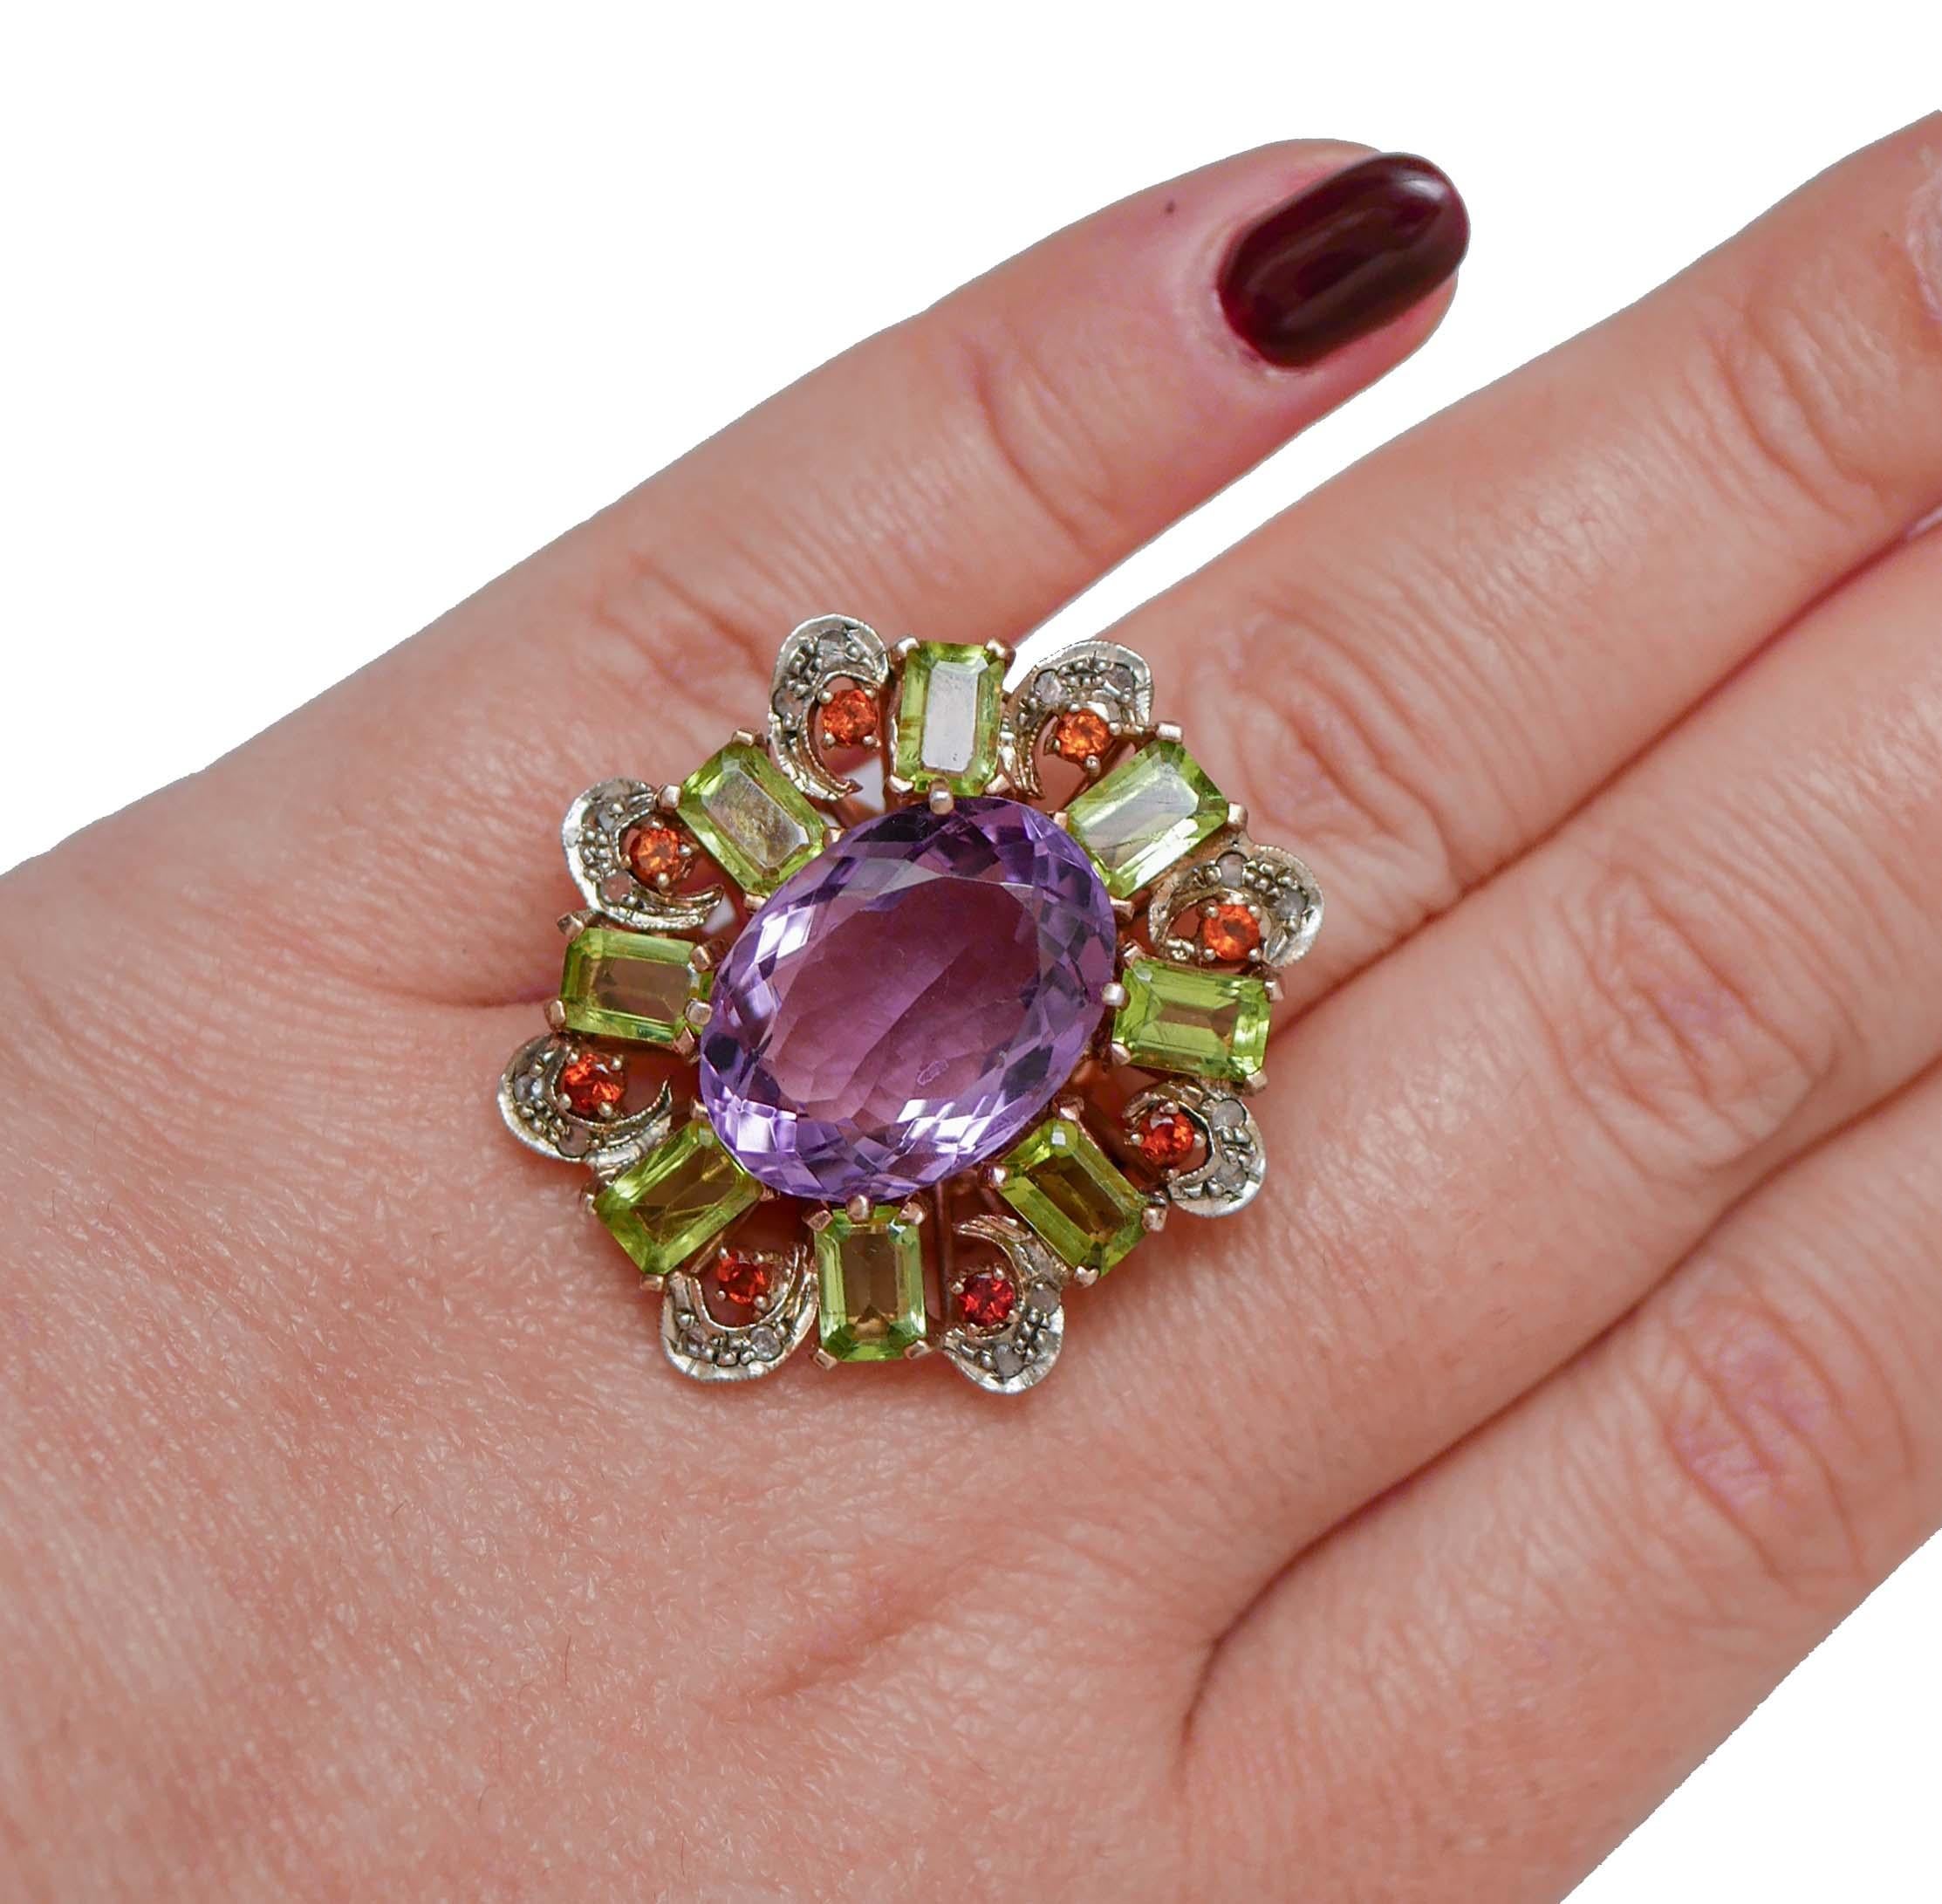 Mixed Cut Amethyst, Peridots, Garnets, Diamonds, Rose Gold and Silver Ring. For Sale